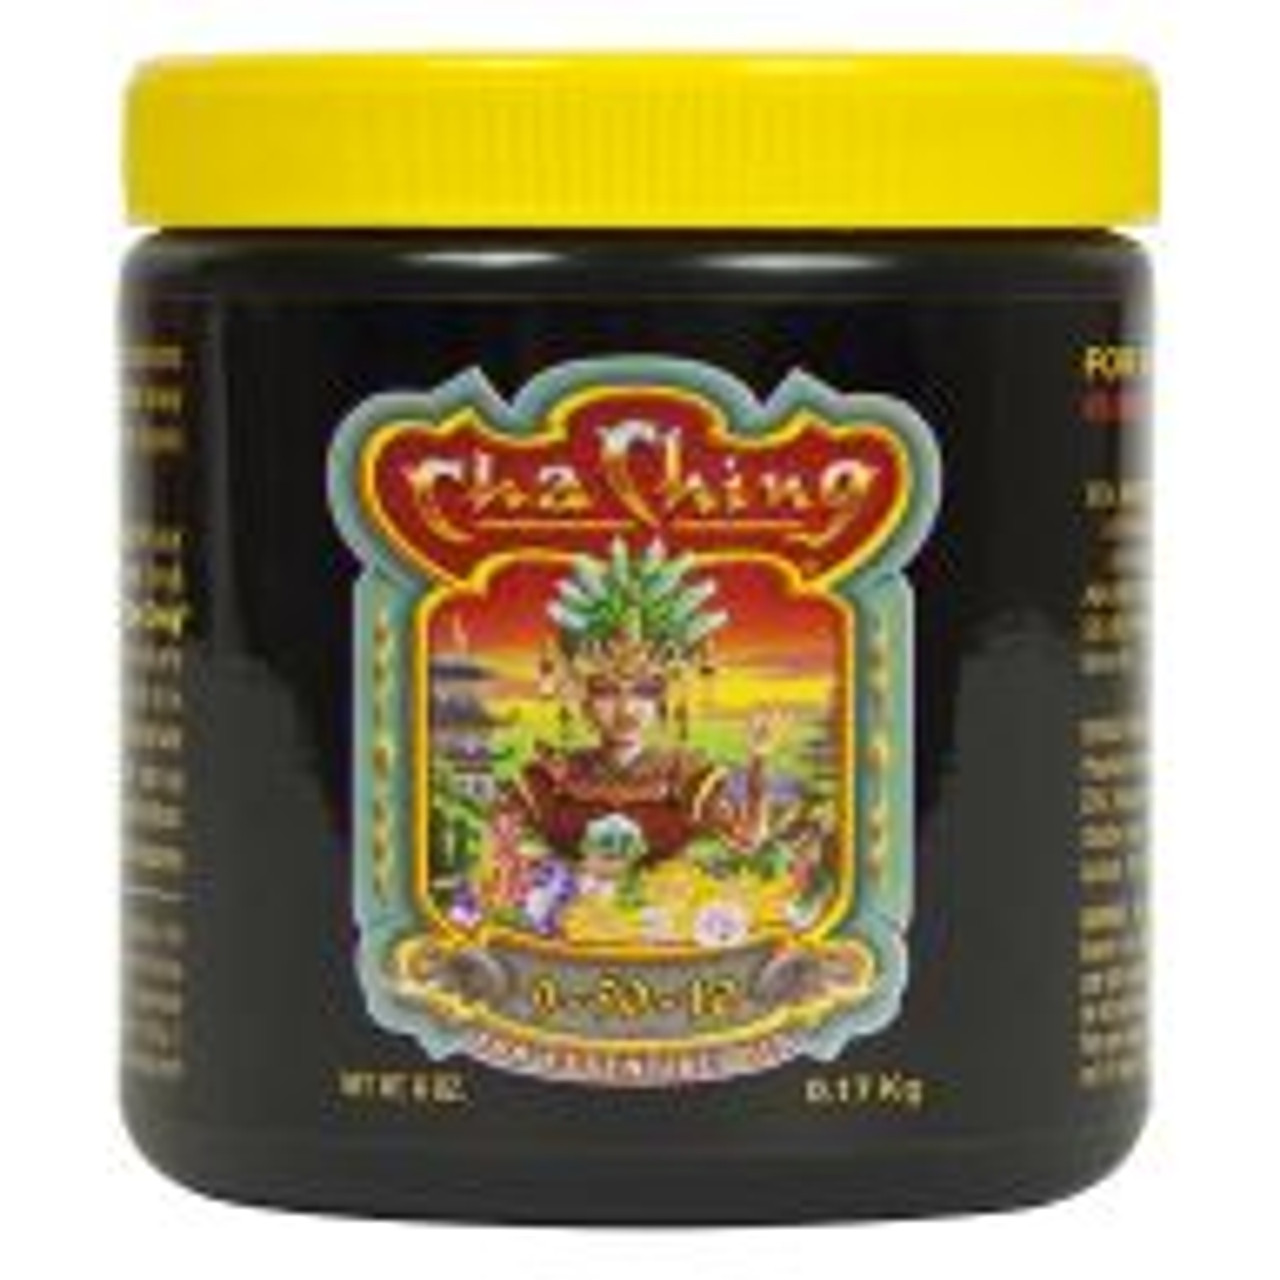 FoxFarm's Cha Ching (9-50-10) is a pH-balanced blend of extra strength macro and micro nutrients formulated to improve flavor and aroma in flowers, fruits and vegetables. Cha Ching can be used as a supplement or stand-alone nutrient during the final weeks of flowering in hydroponic and soil systems.